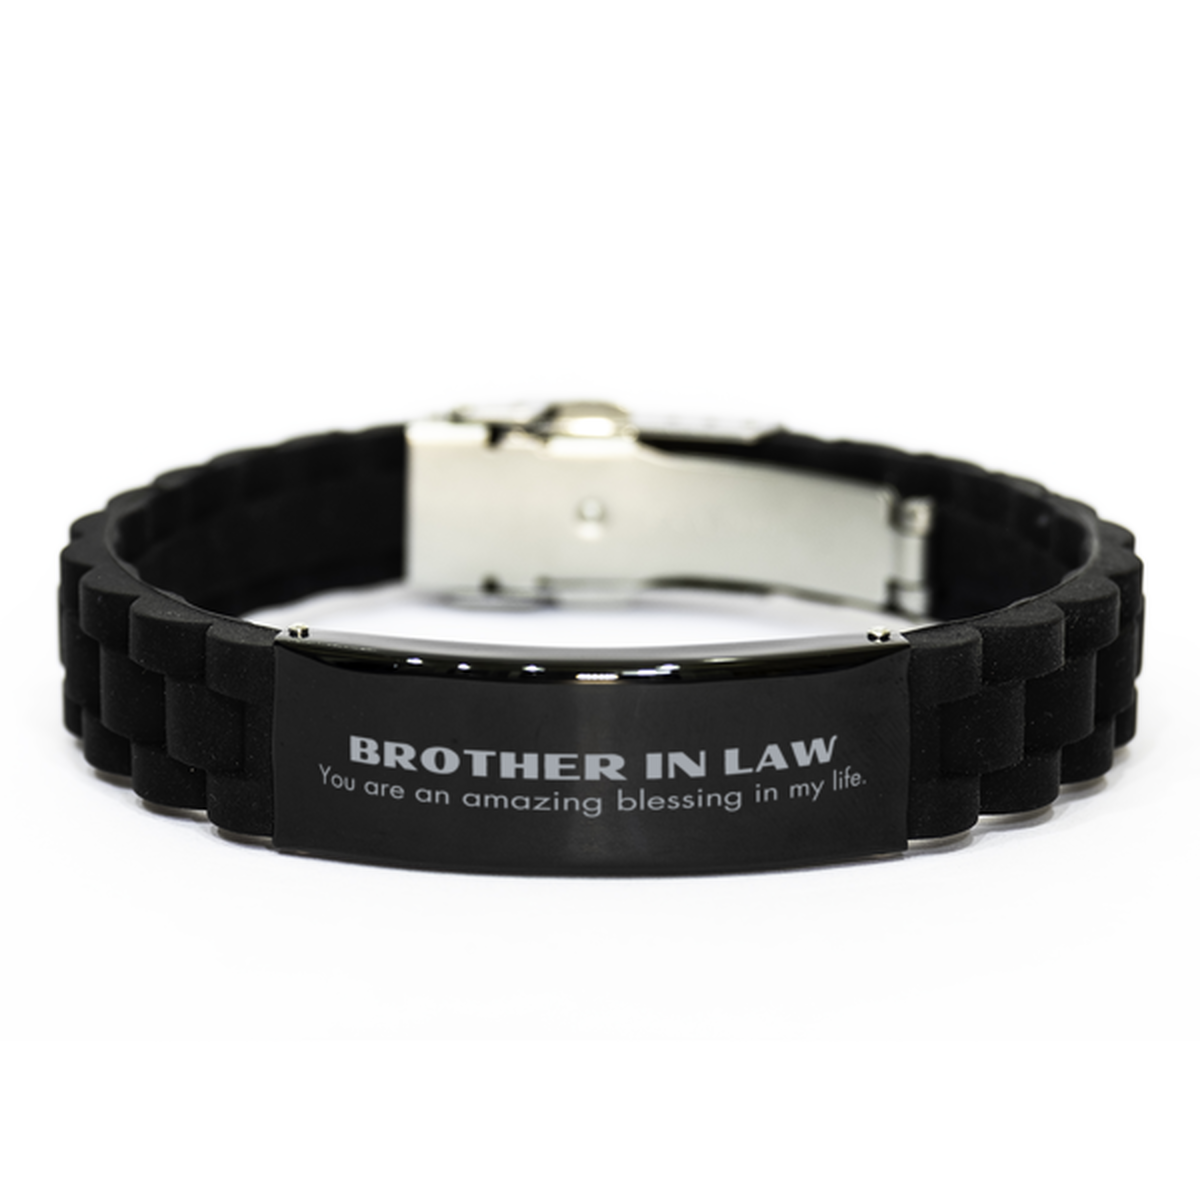 Brother In Law Black Glidelock Clasp Bracelet, You are an amazing blessing in my life, Thank You Gifts For Brother In Law, Inspirational Birthday Christmas Unique Gifts For Brother In Law